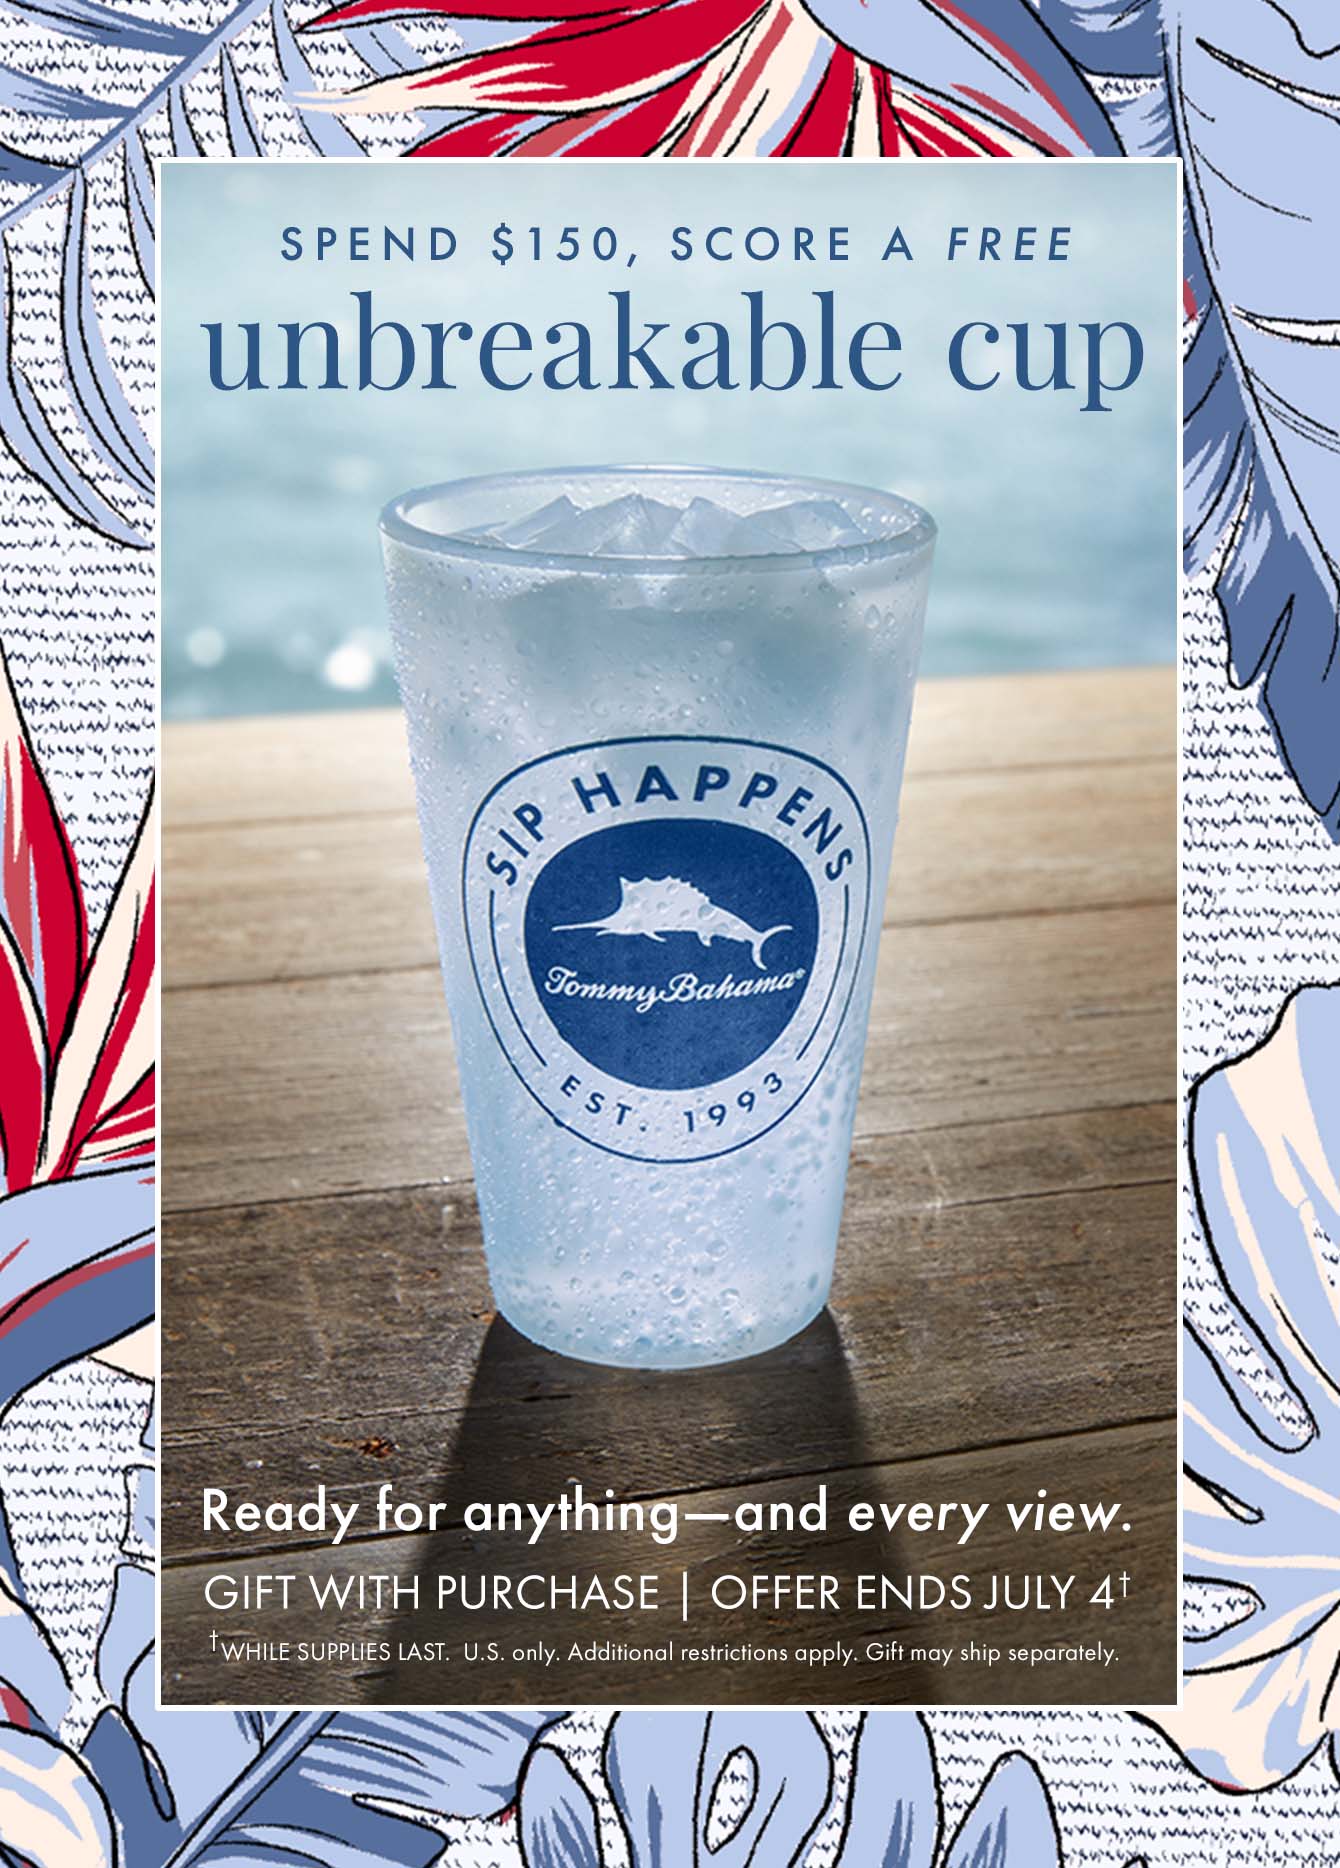 Spend $150, score a free unbreakable cup